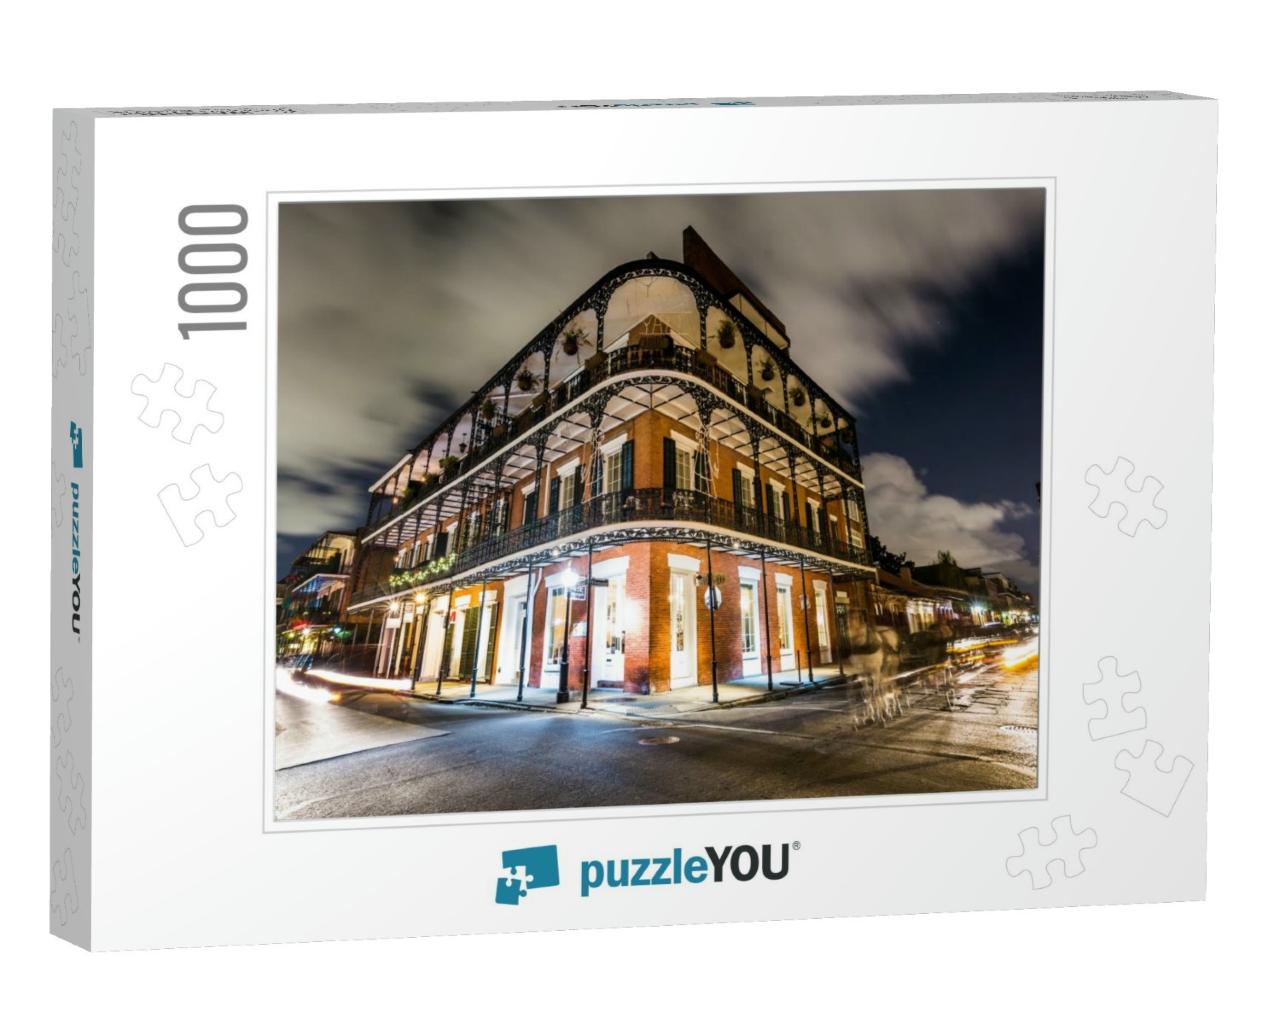 Downtown French Quarters New Orleans, Louisiana At Night... Jigsaw Puzzle with 1000 pieces